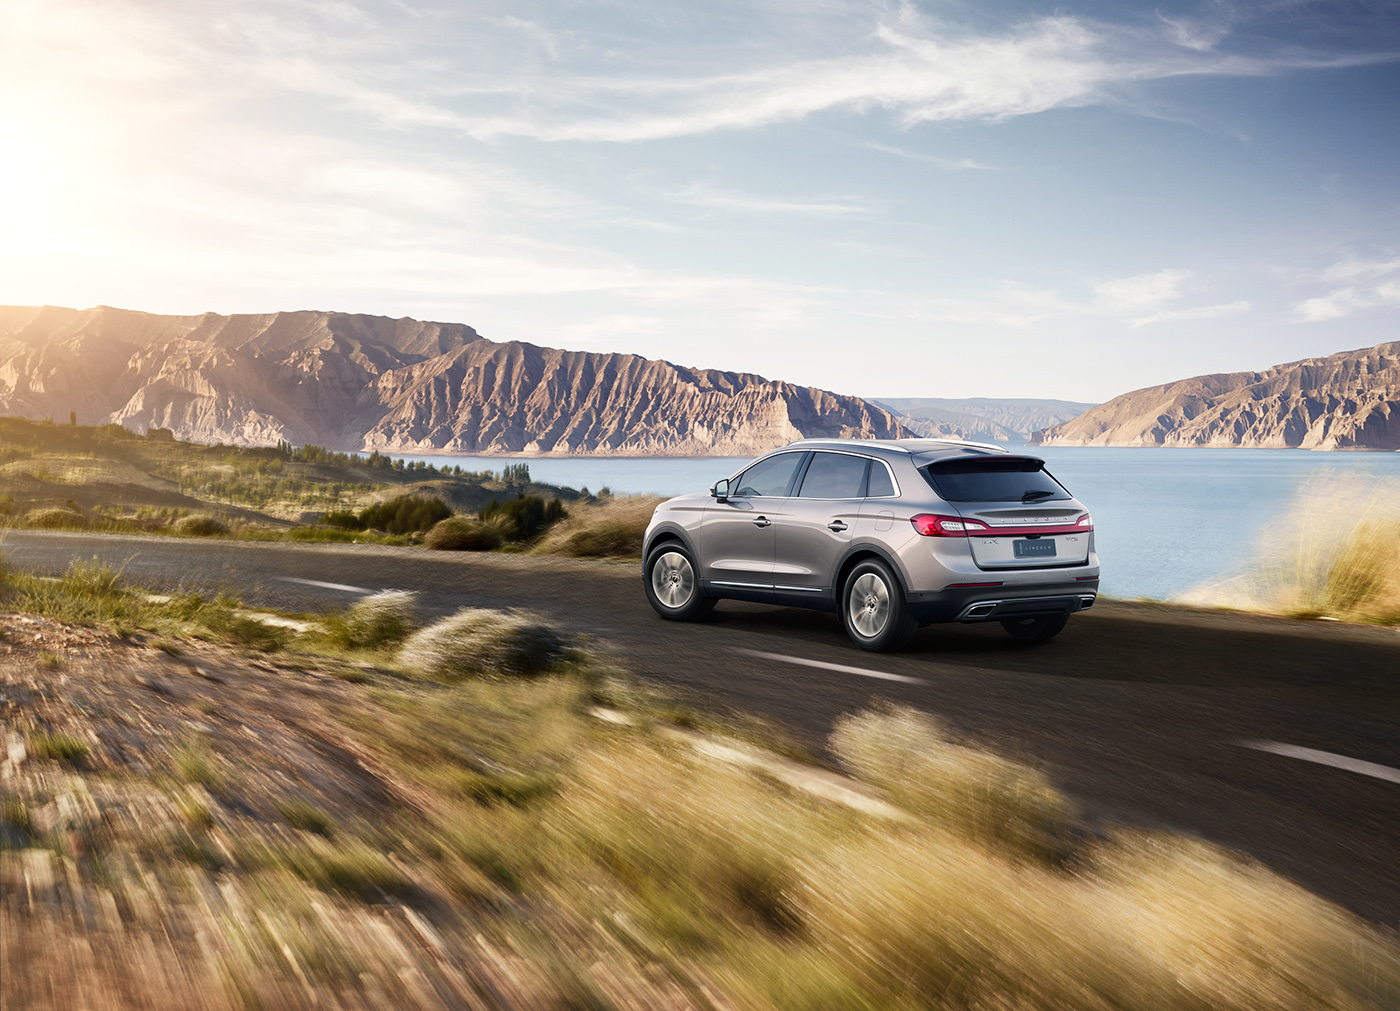 lincoln MKX location Post Production retouc motion rig china shanghai Bejing lake mountains